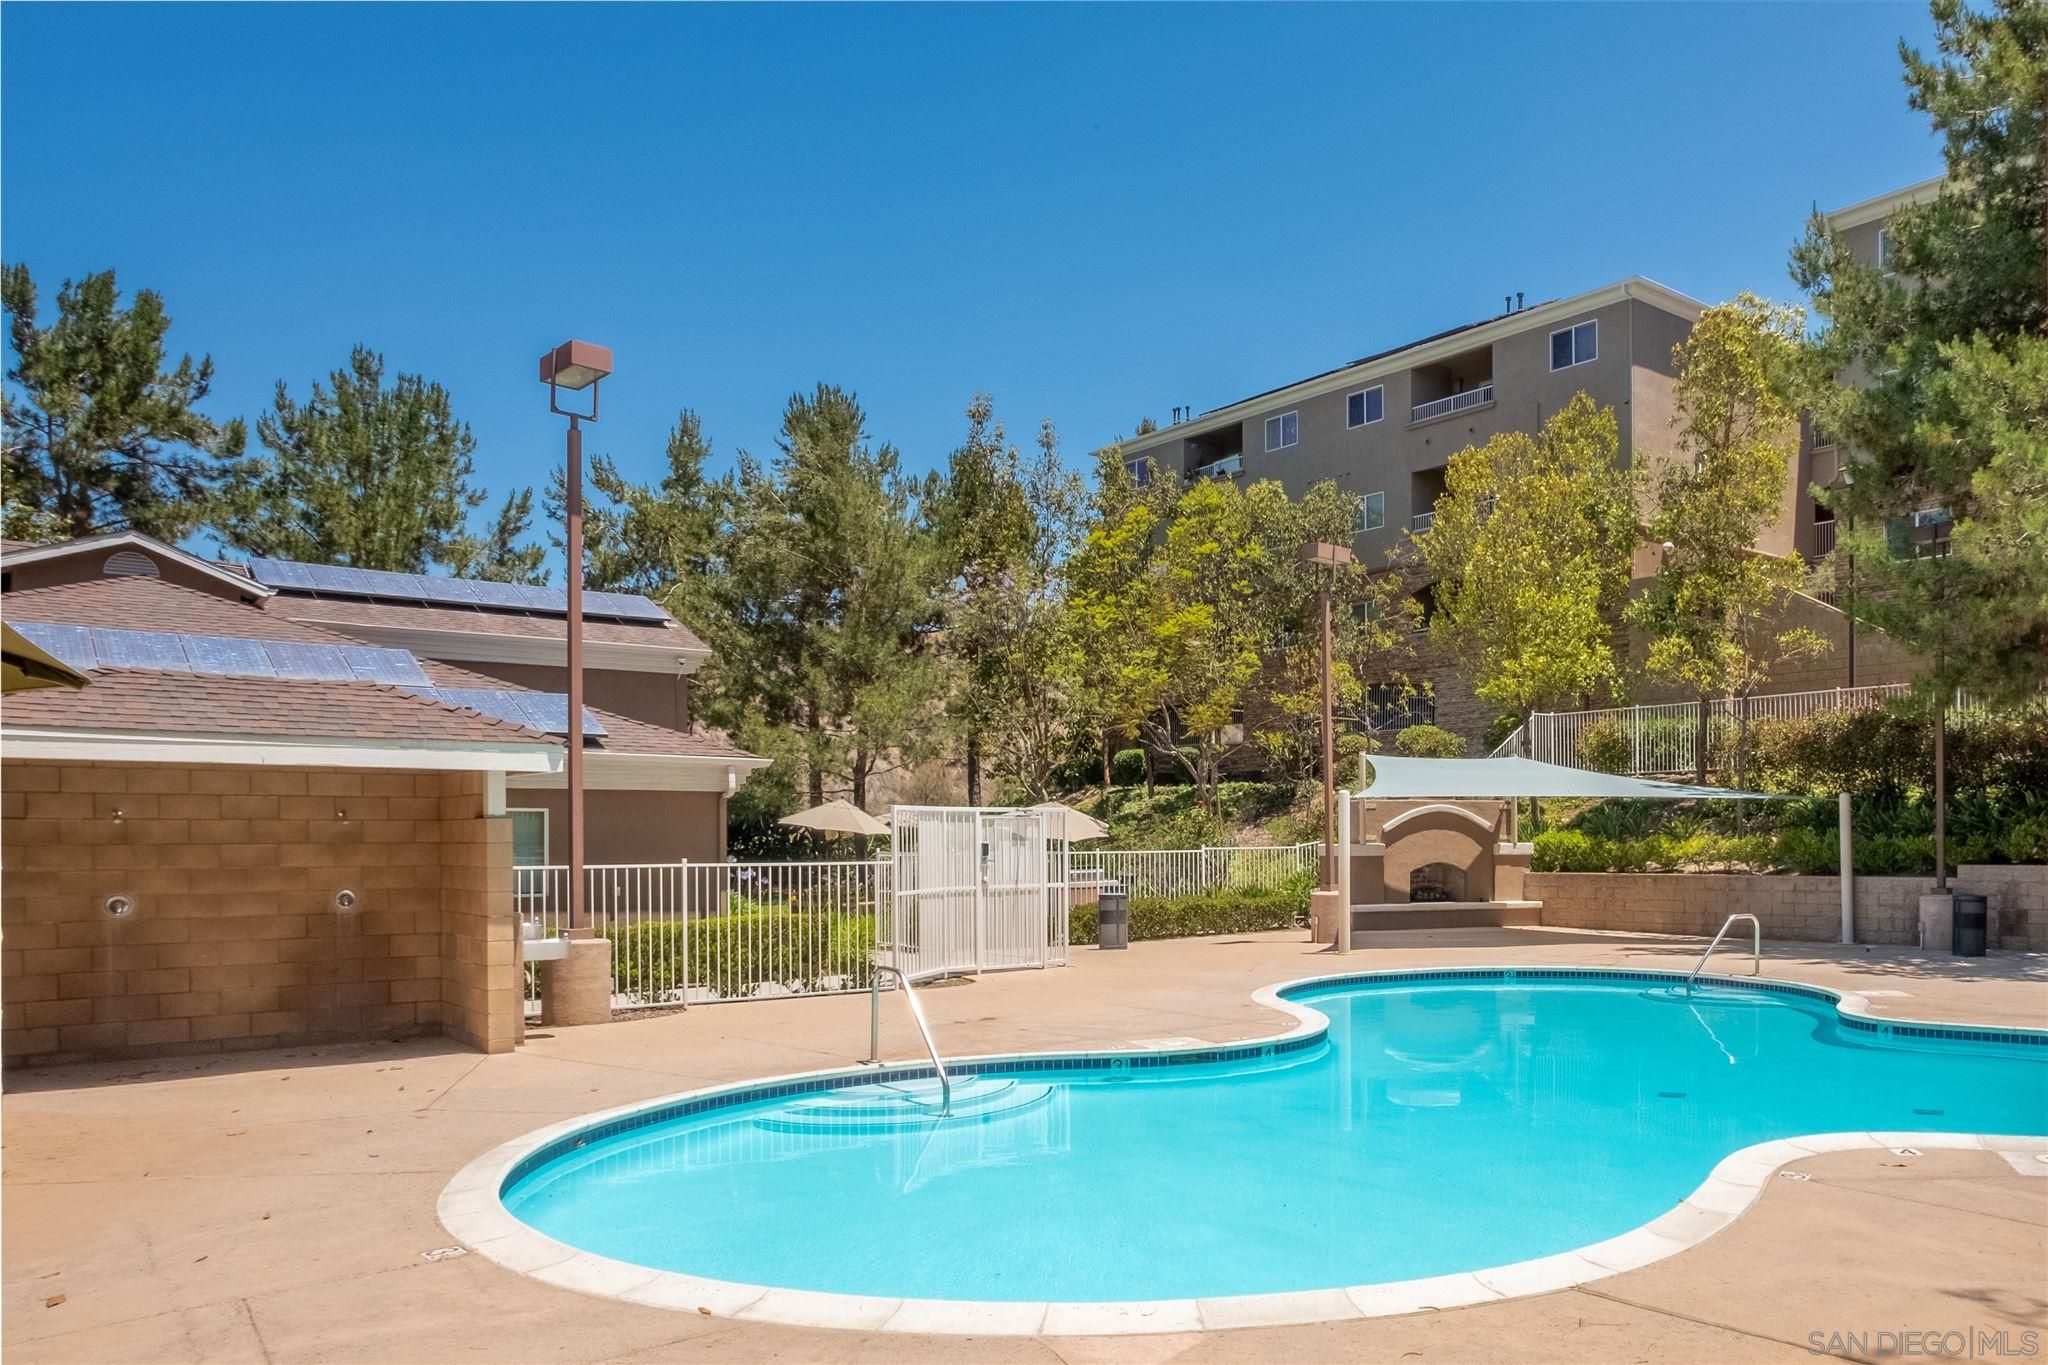 Main Photo: SAN DIEGO Condo for sale : 2 bedrooms : 7671 MISSION GORGE RD #109